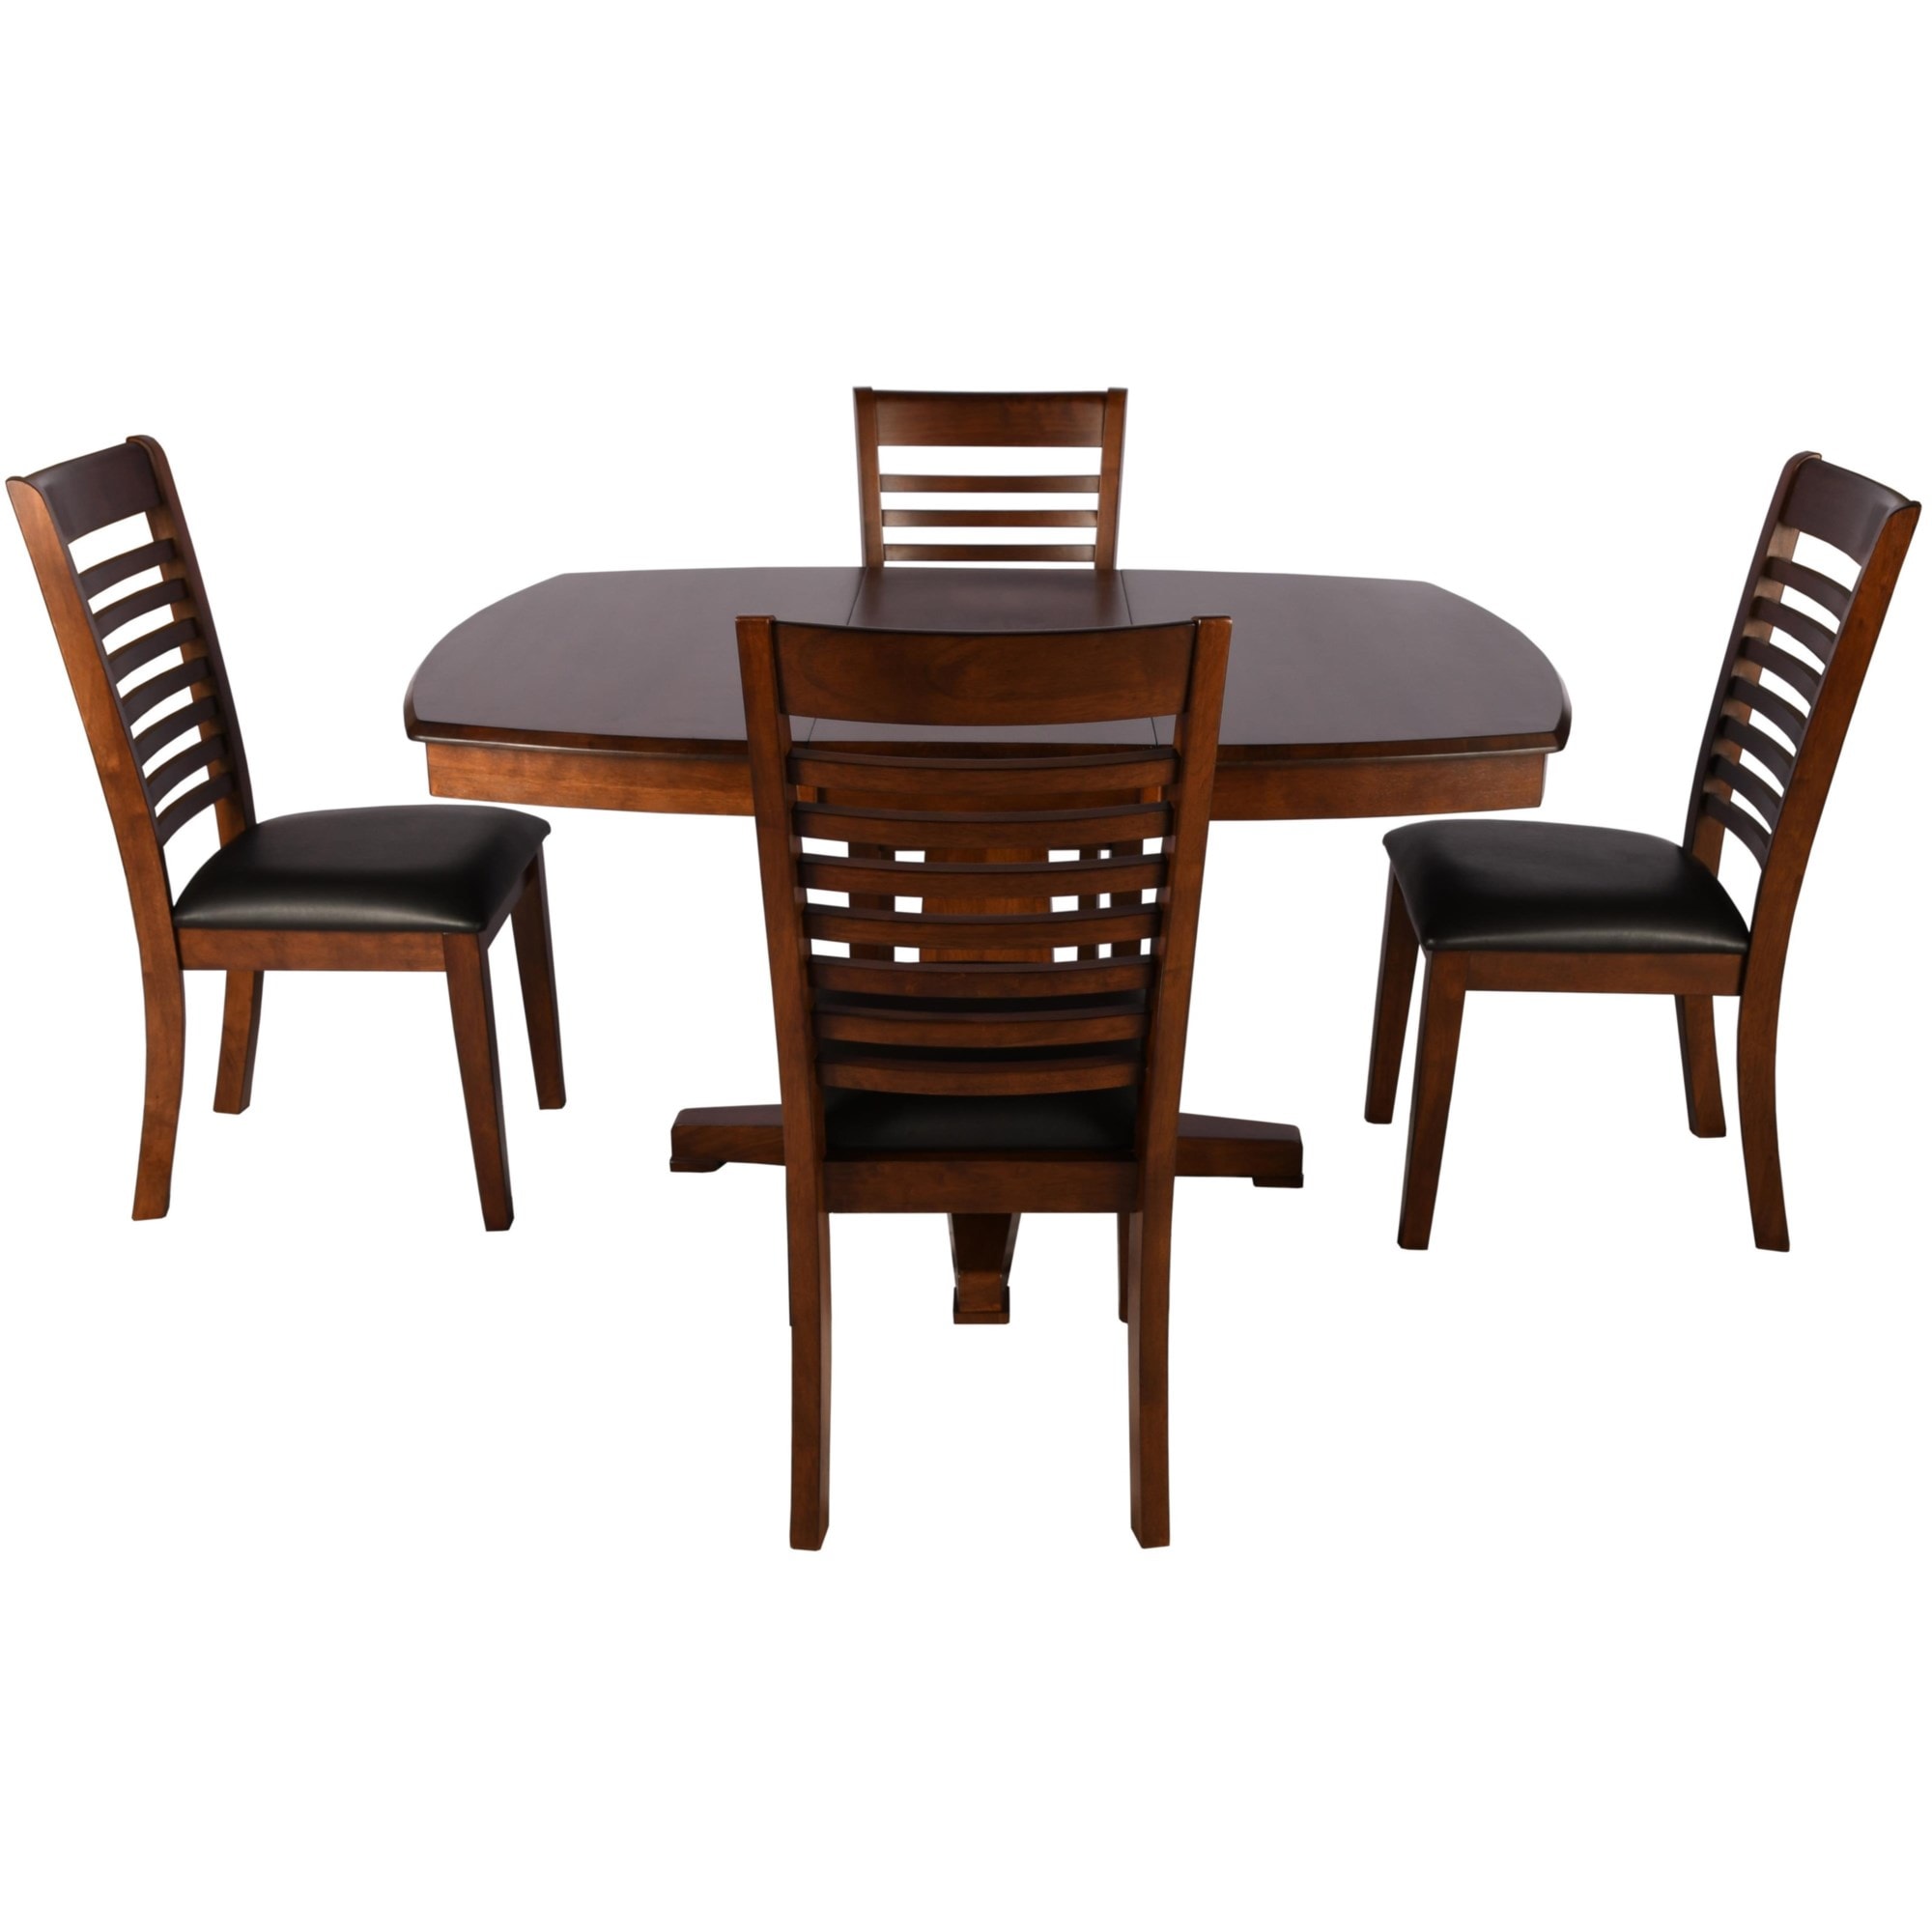 Shop the Dining Set from Option 1